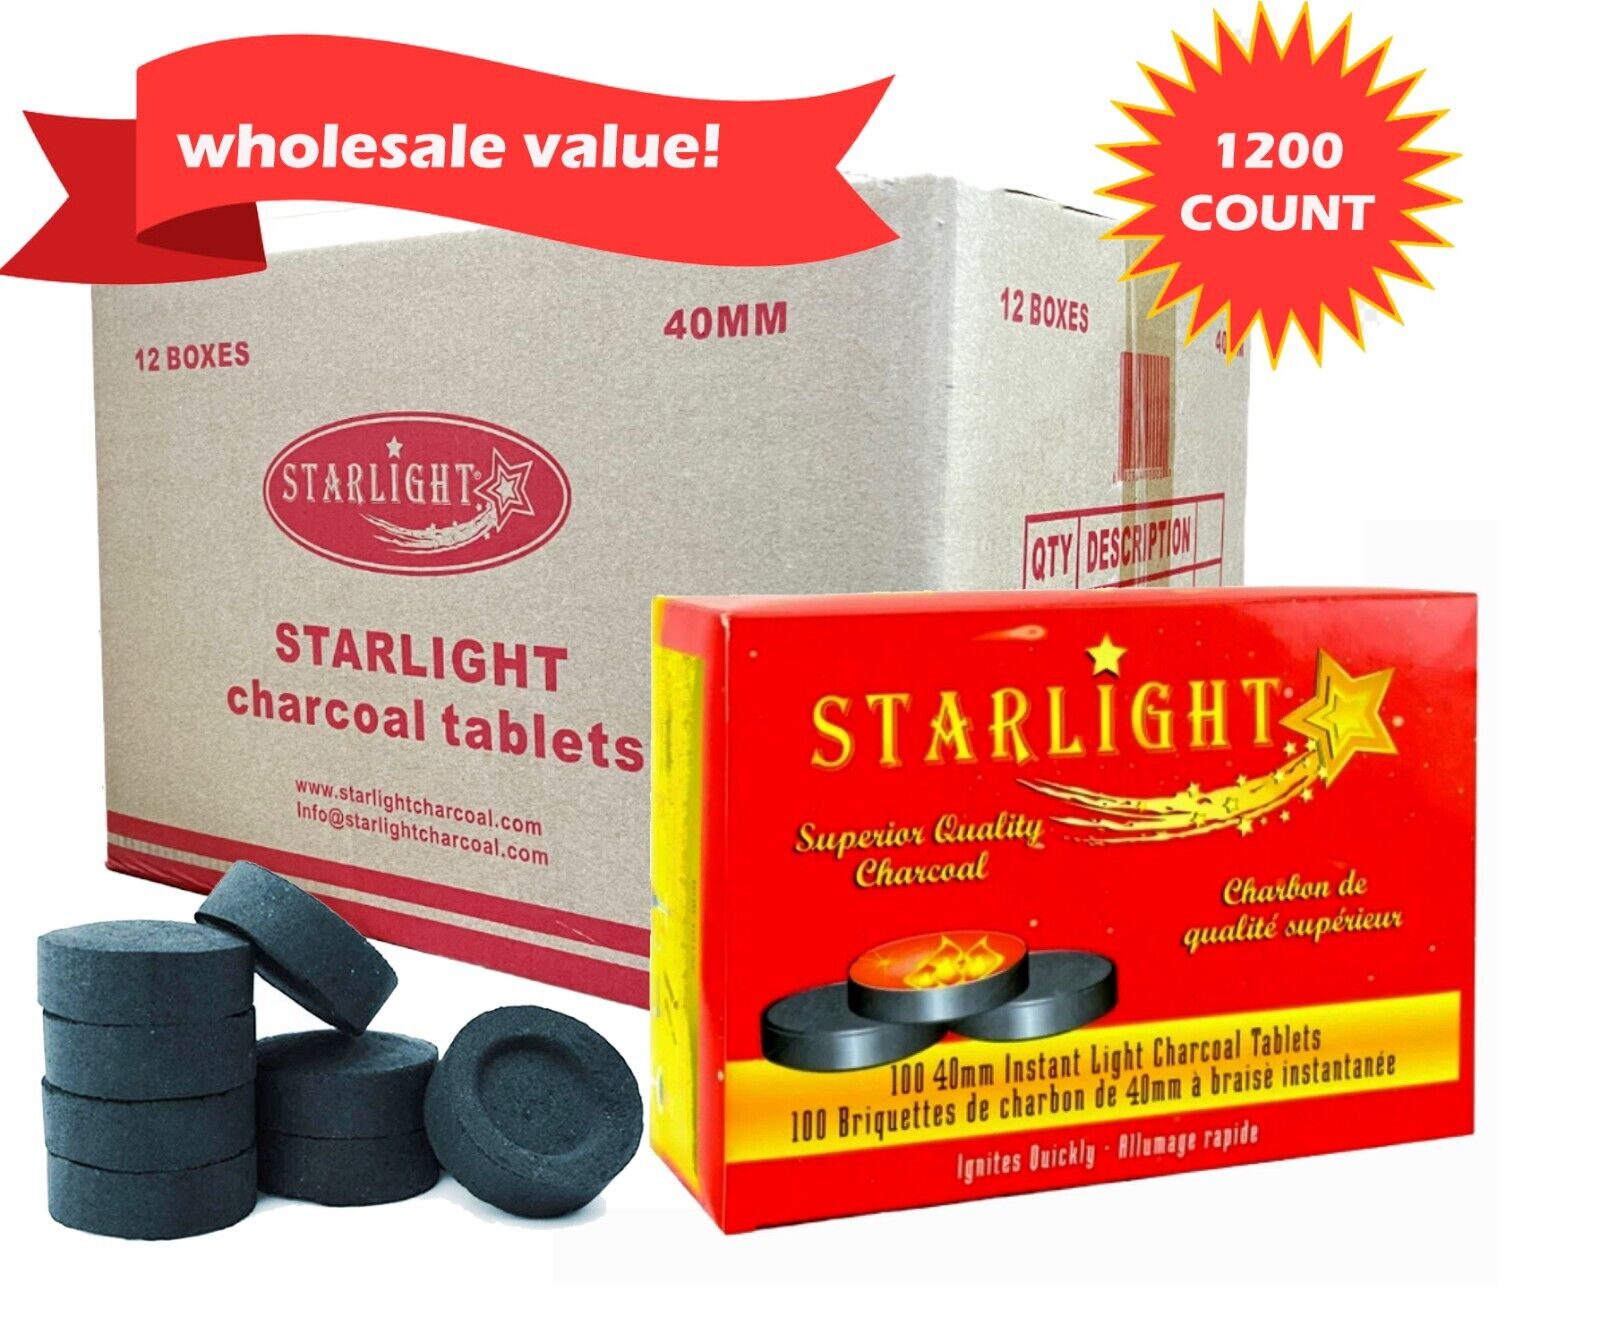 STARLIGHT 40mm Premium Hookah Charcoal Round Incense *Wholesale Value* 1200ct 